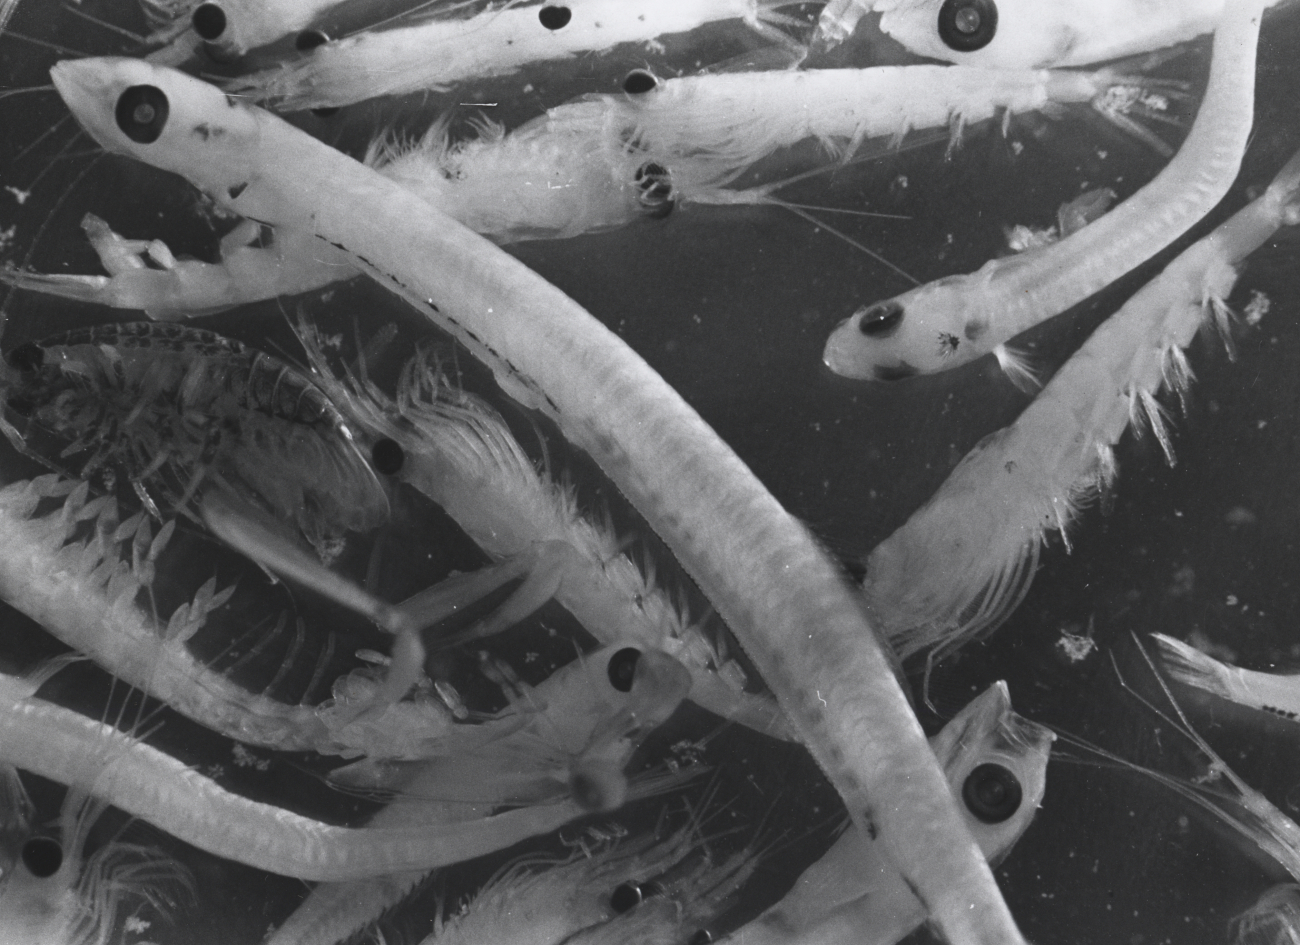 Sardine larva and other plankters from the Gulf of California